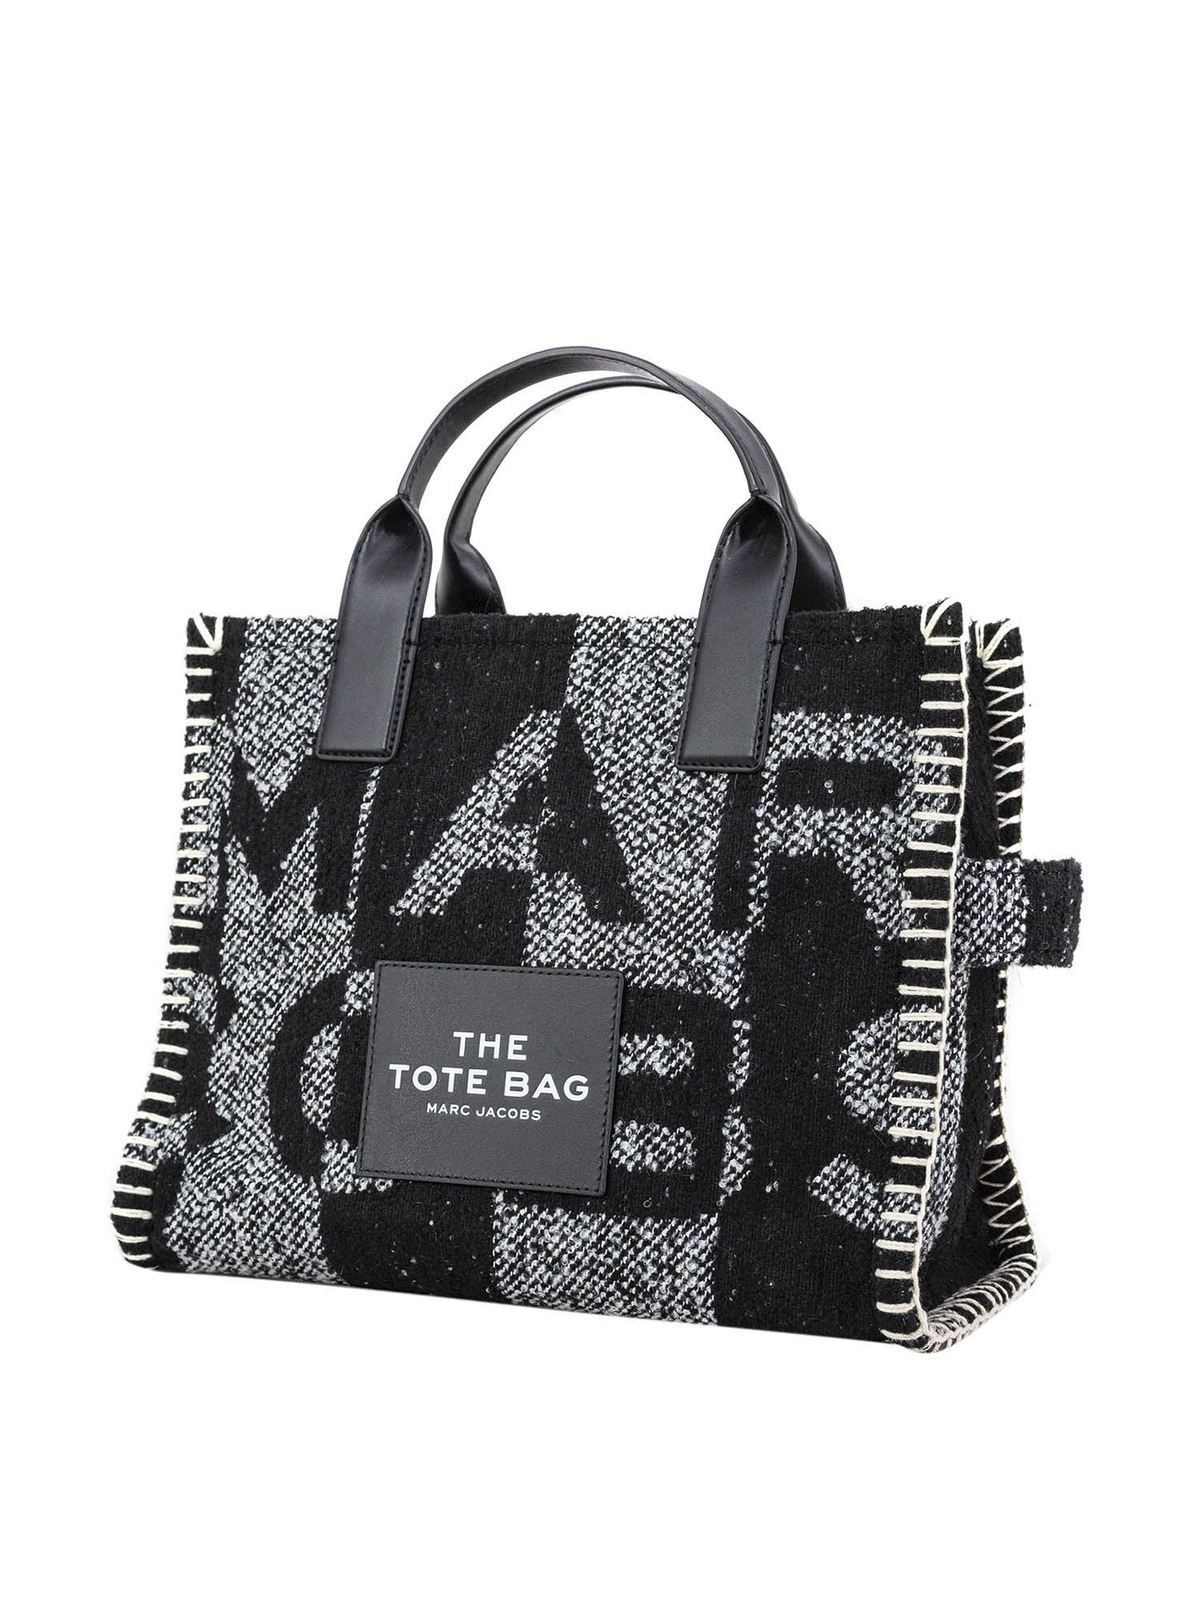 Totes bags Marc Jacobs - The Blanket Traveller bag in black and